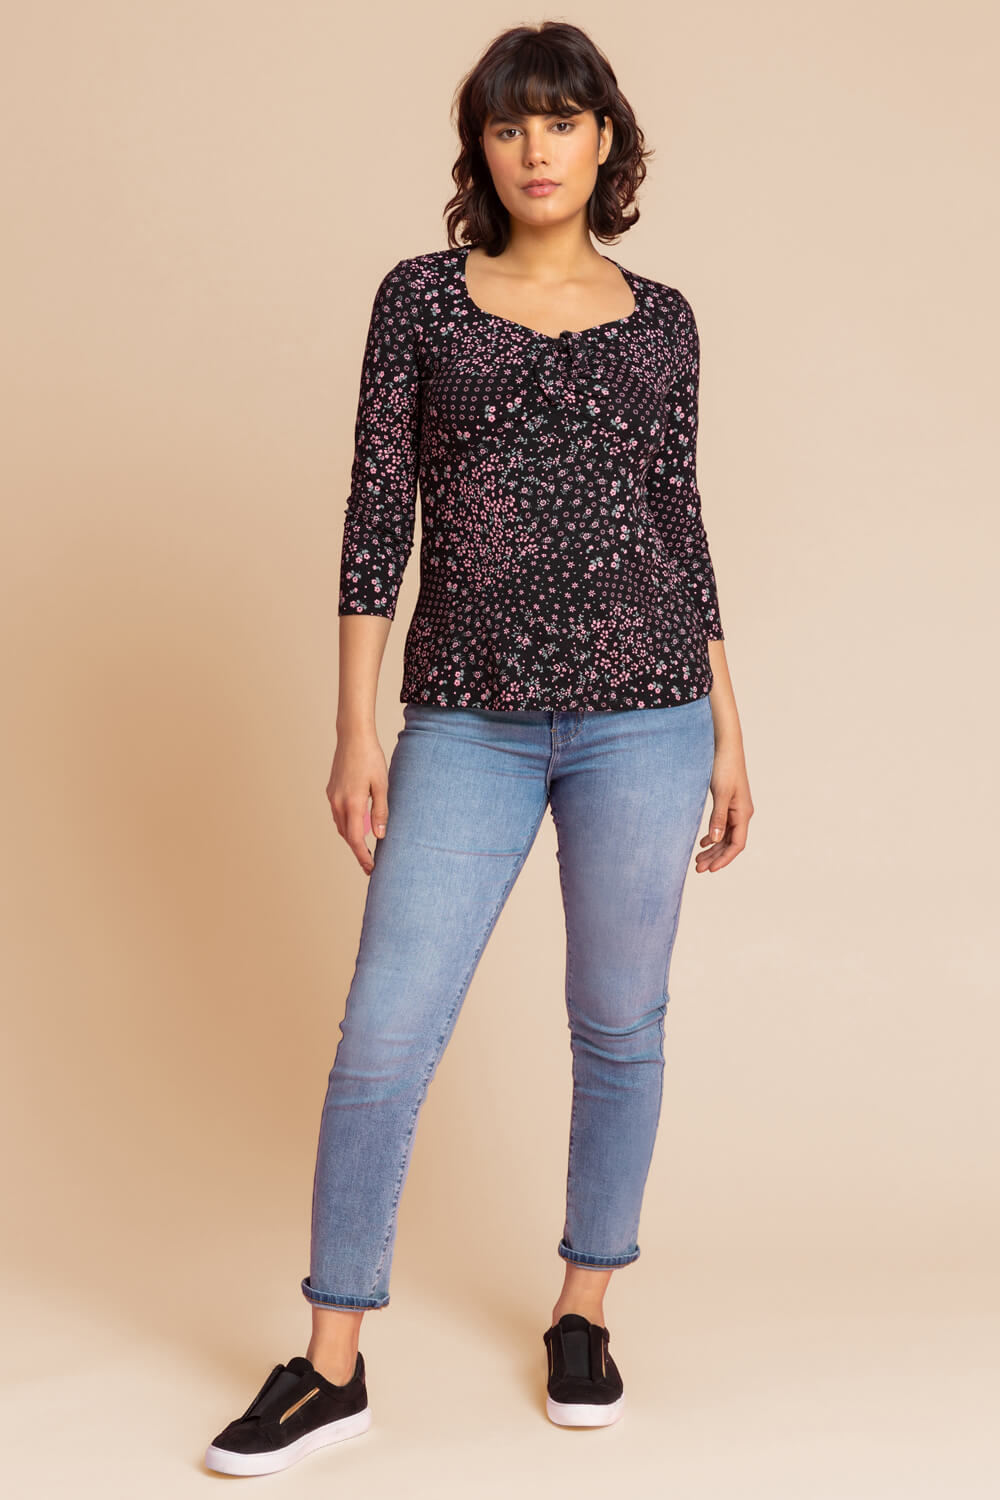 Black Ditsy Floral Print Ruched Top, Image 3 of 5